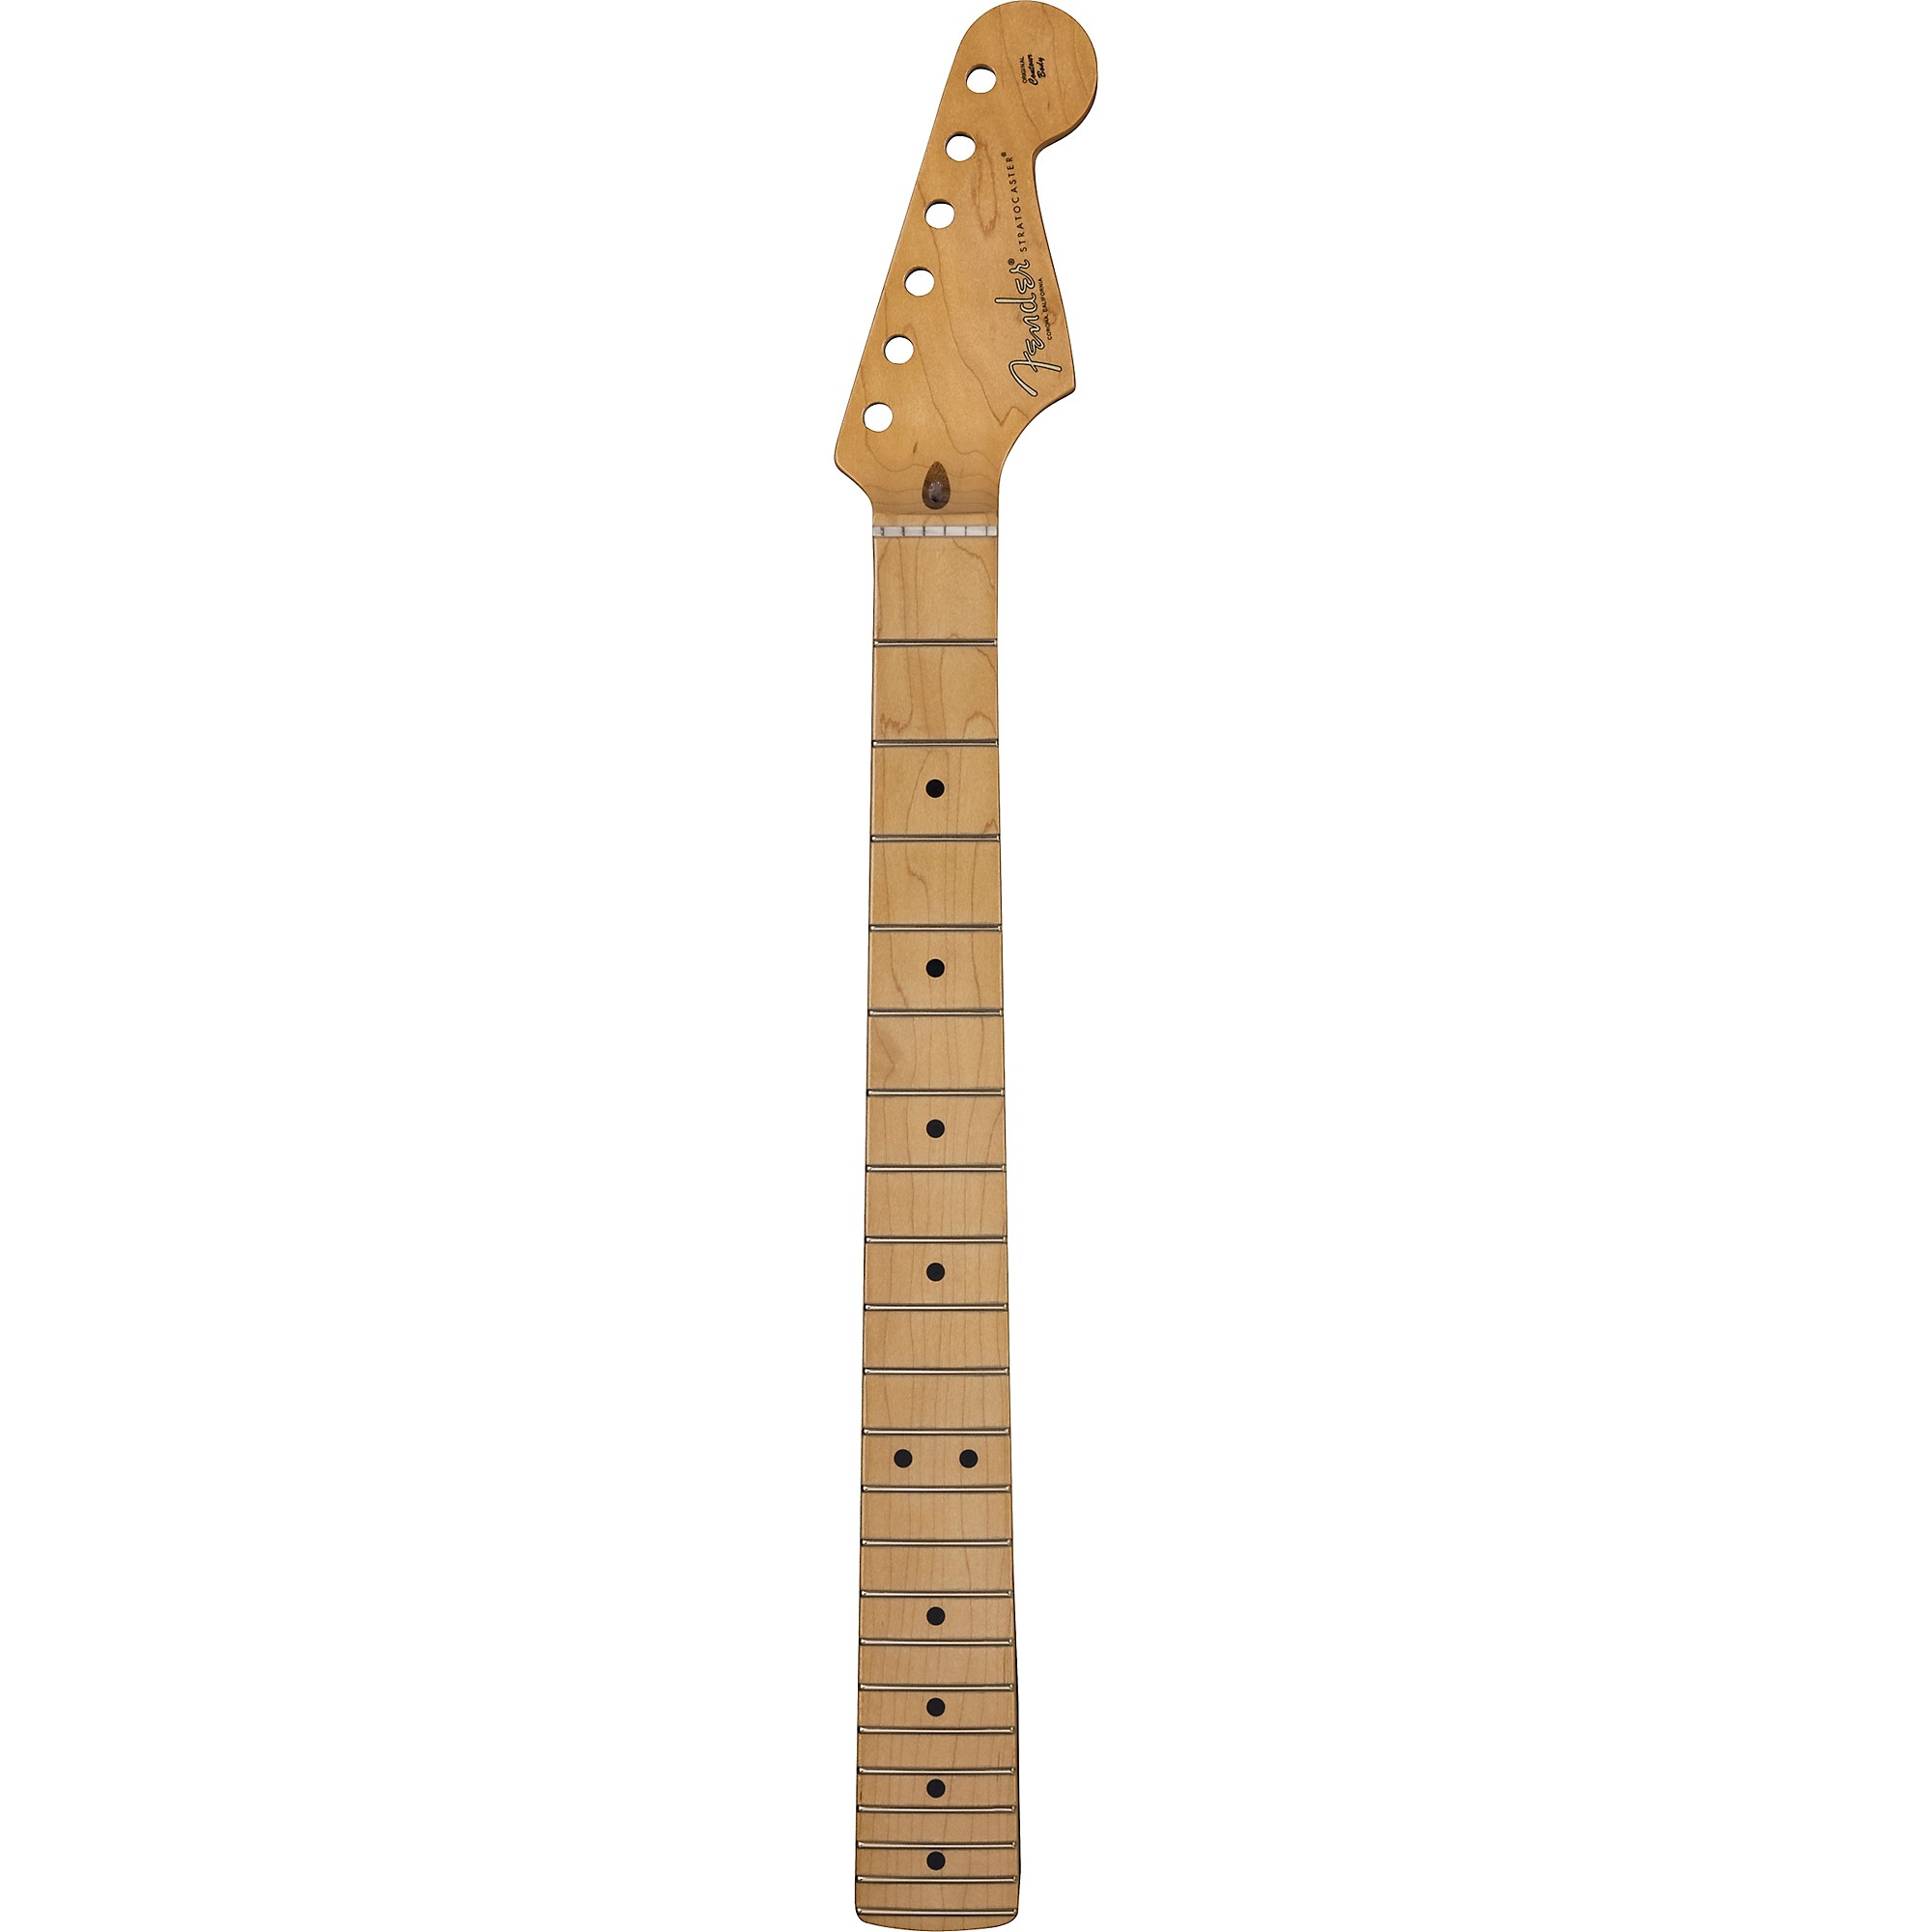 Fender American Professional II Stratocaster Neck, 22 Narrow-Tall